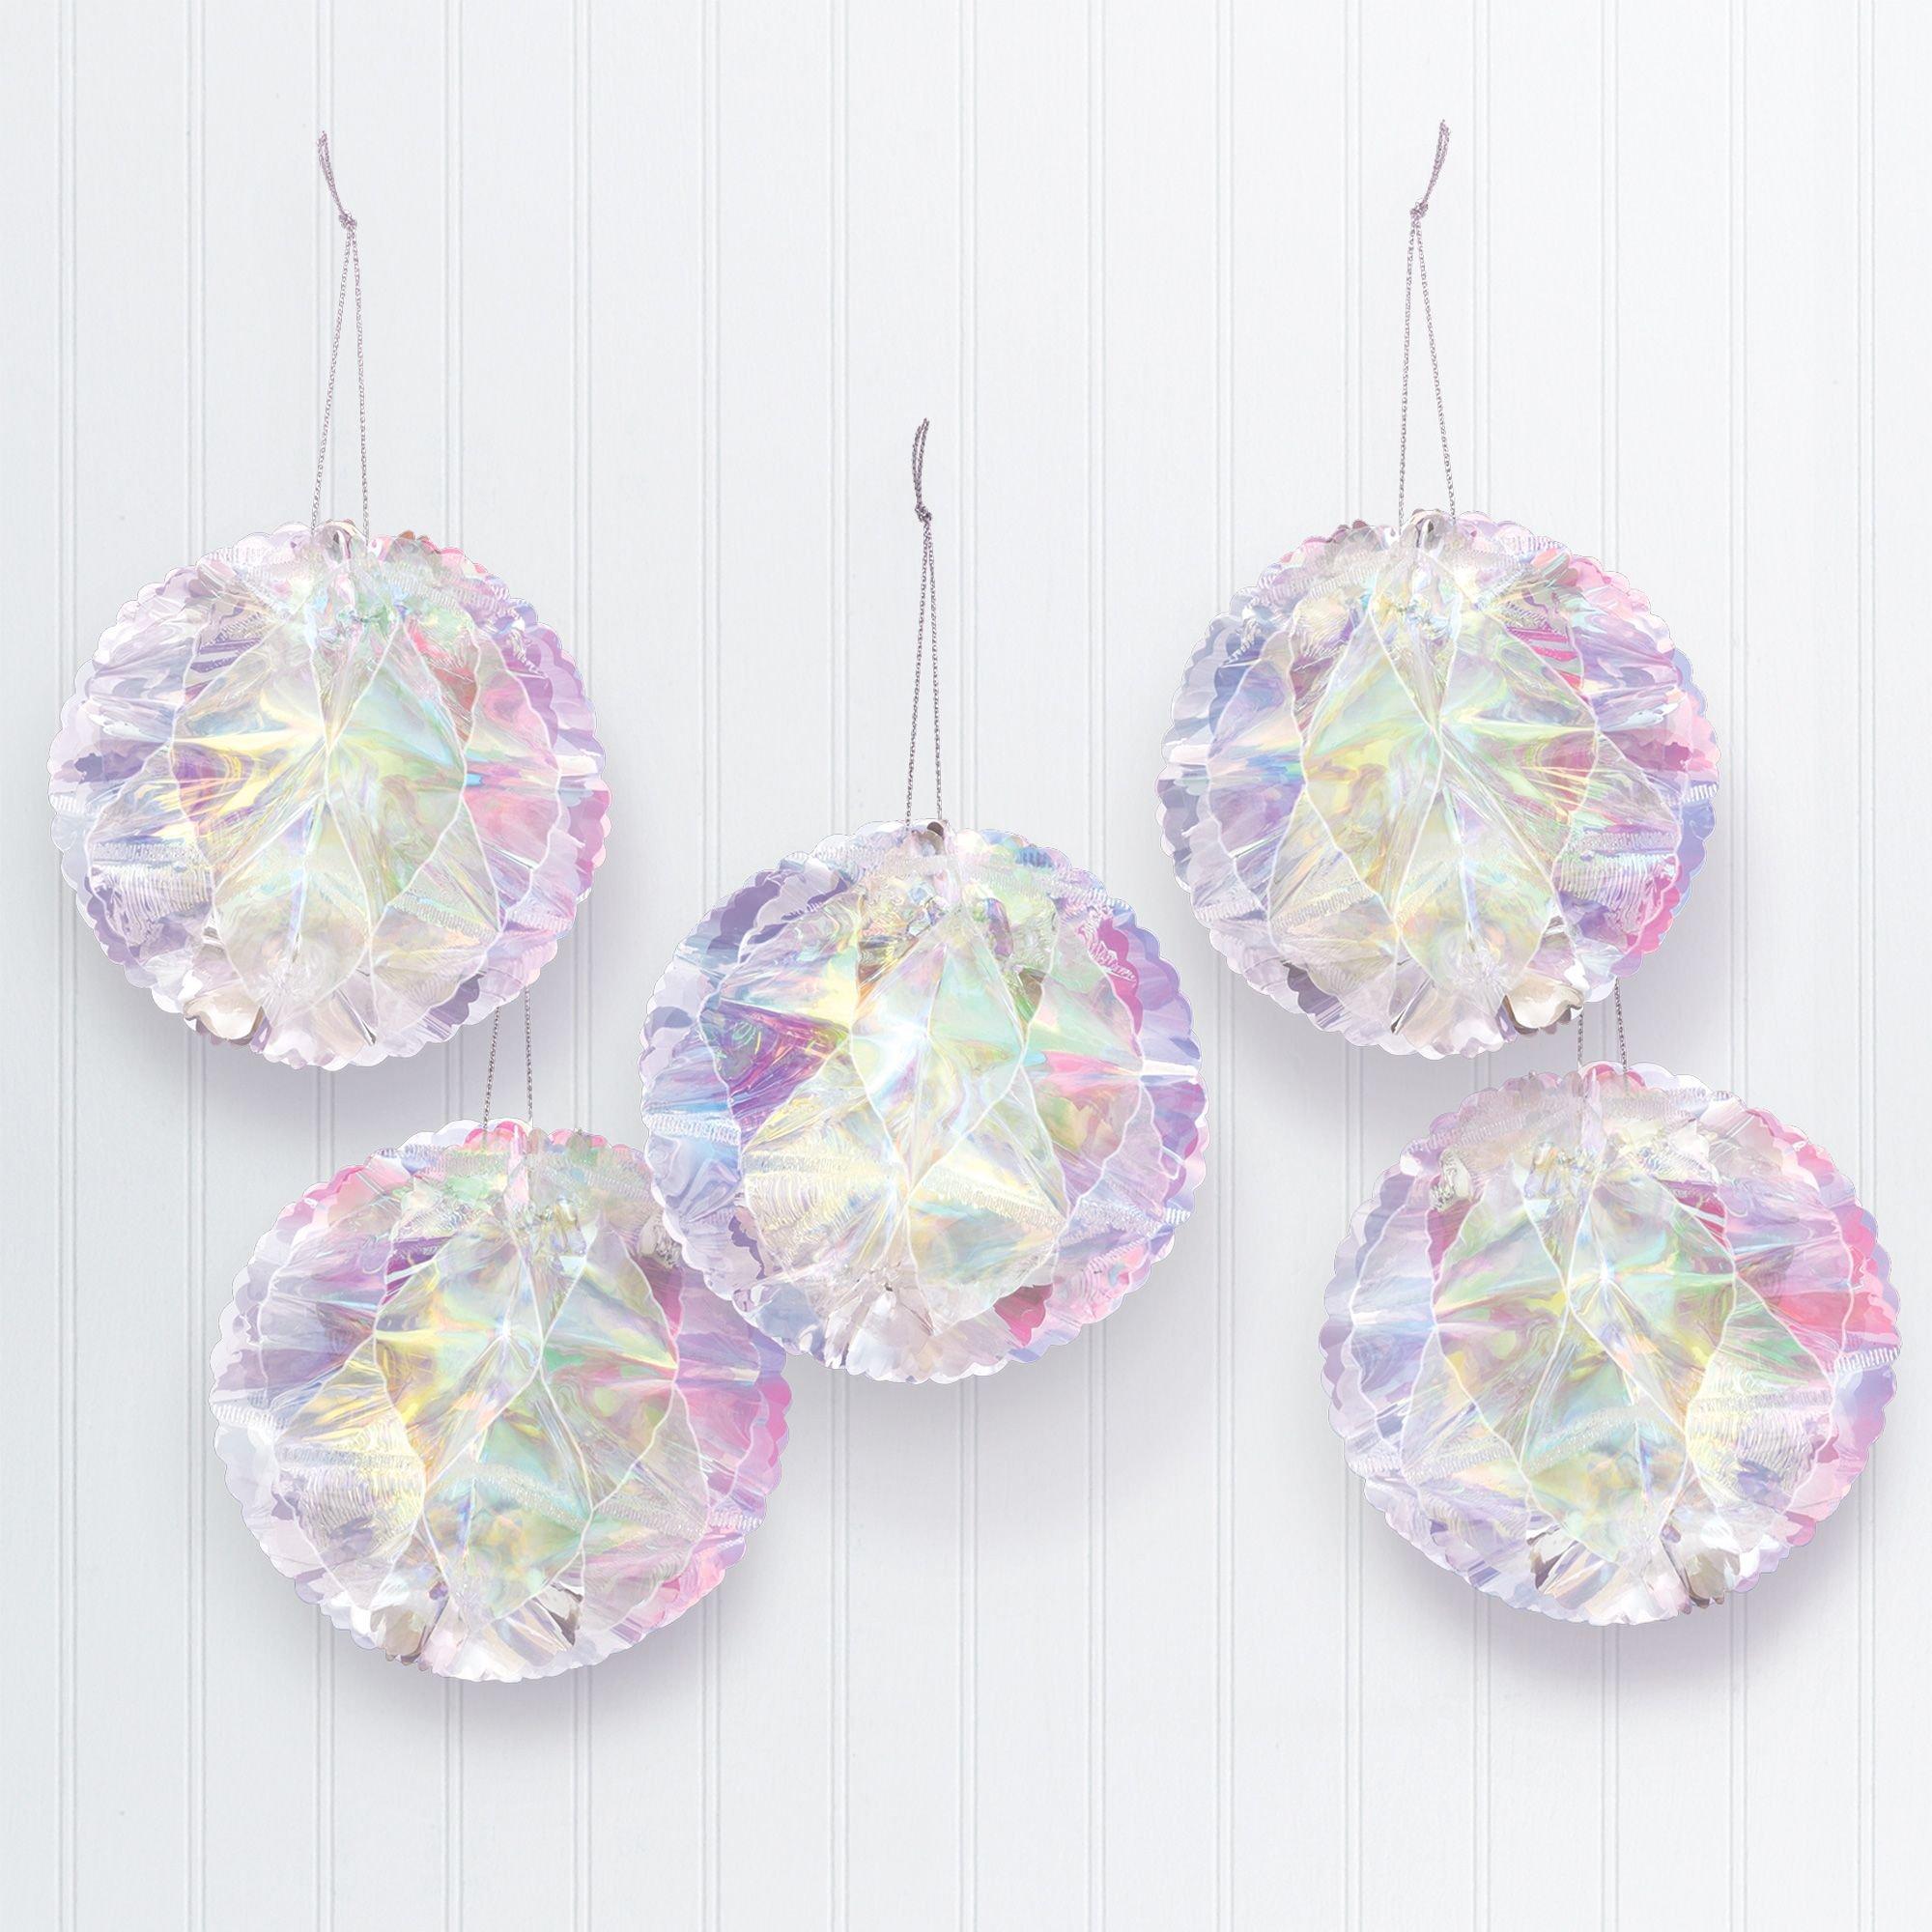 Multicolor Pastel Honeycomb Hanging Decorations, 12ft, 29pc